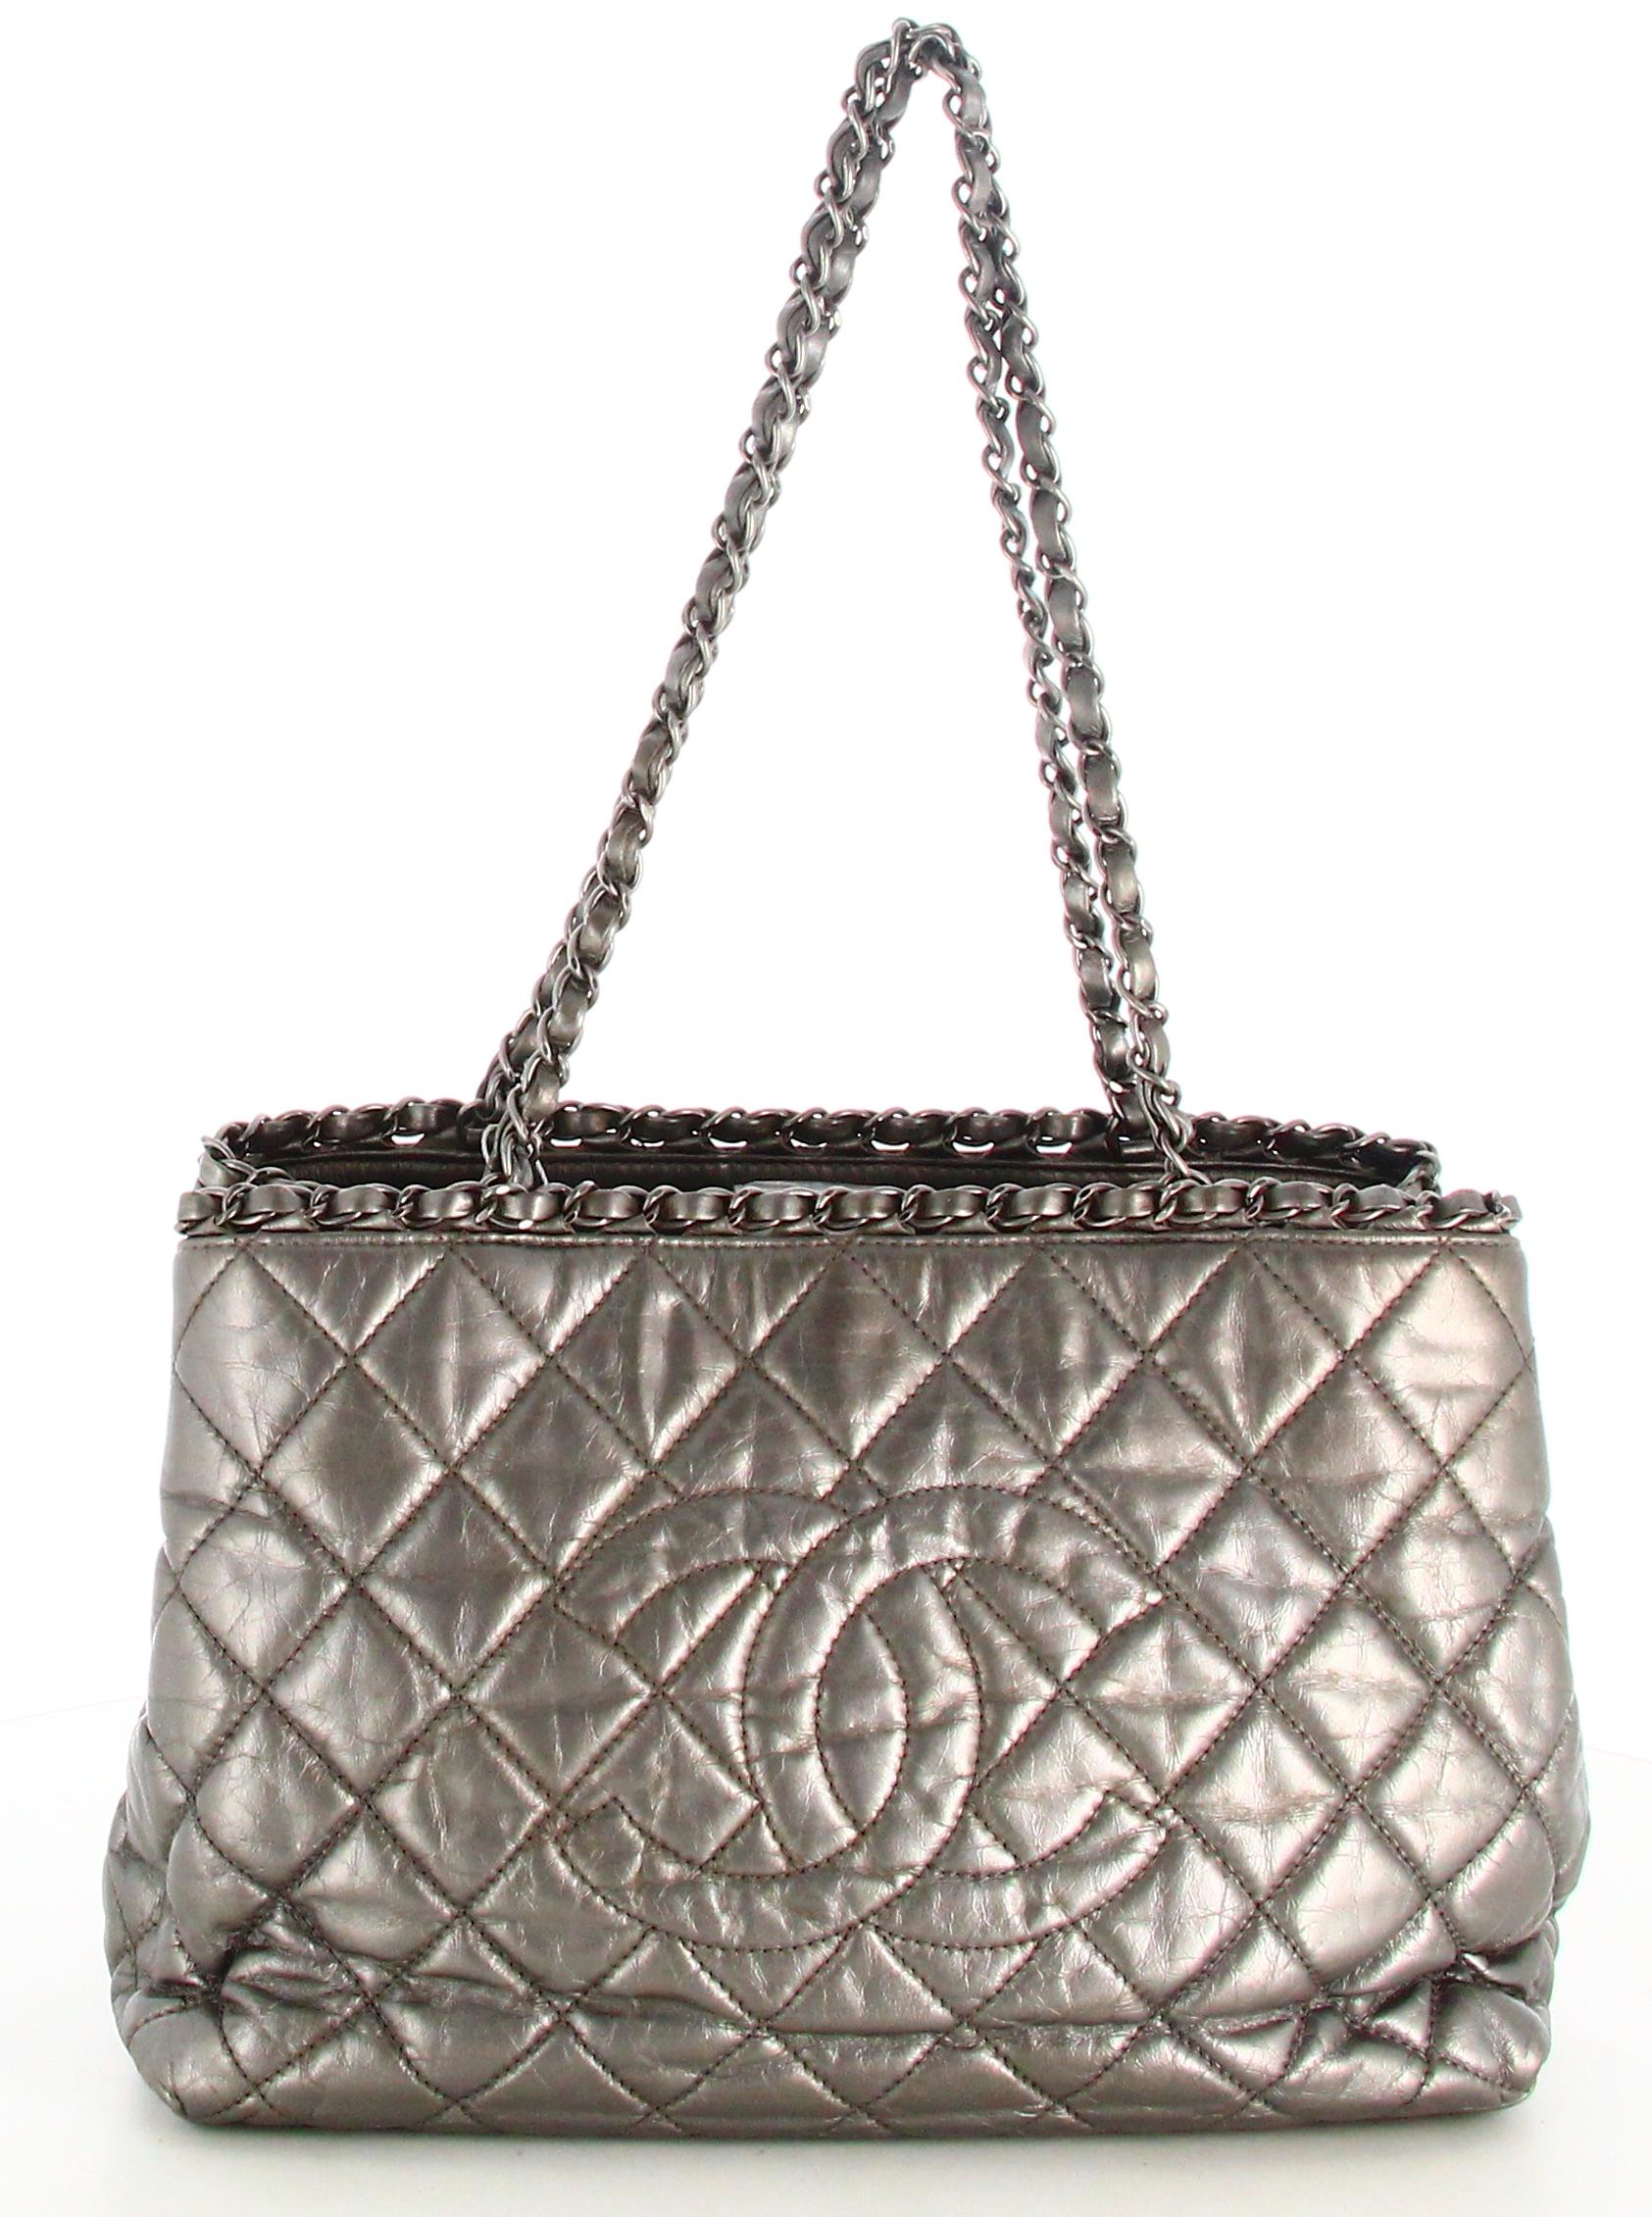 2012 Chanel Chain Me Tote Handbag Grey

- Very good condition. Shows signs of wear over time. 
- Chanel Handbag 
- Quilted grey leather
- Double silver chain handle 
- Interior: black lining plus inside pocket